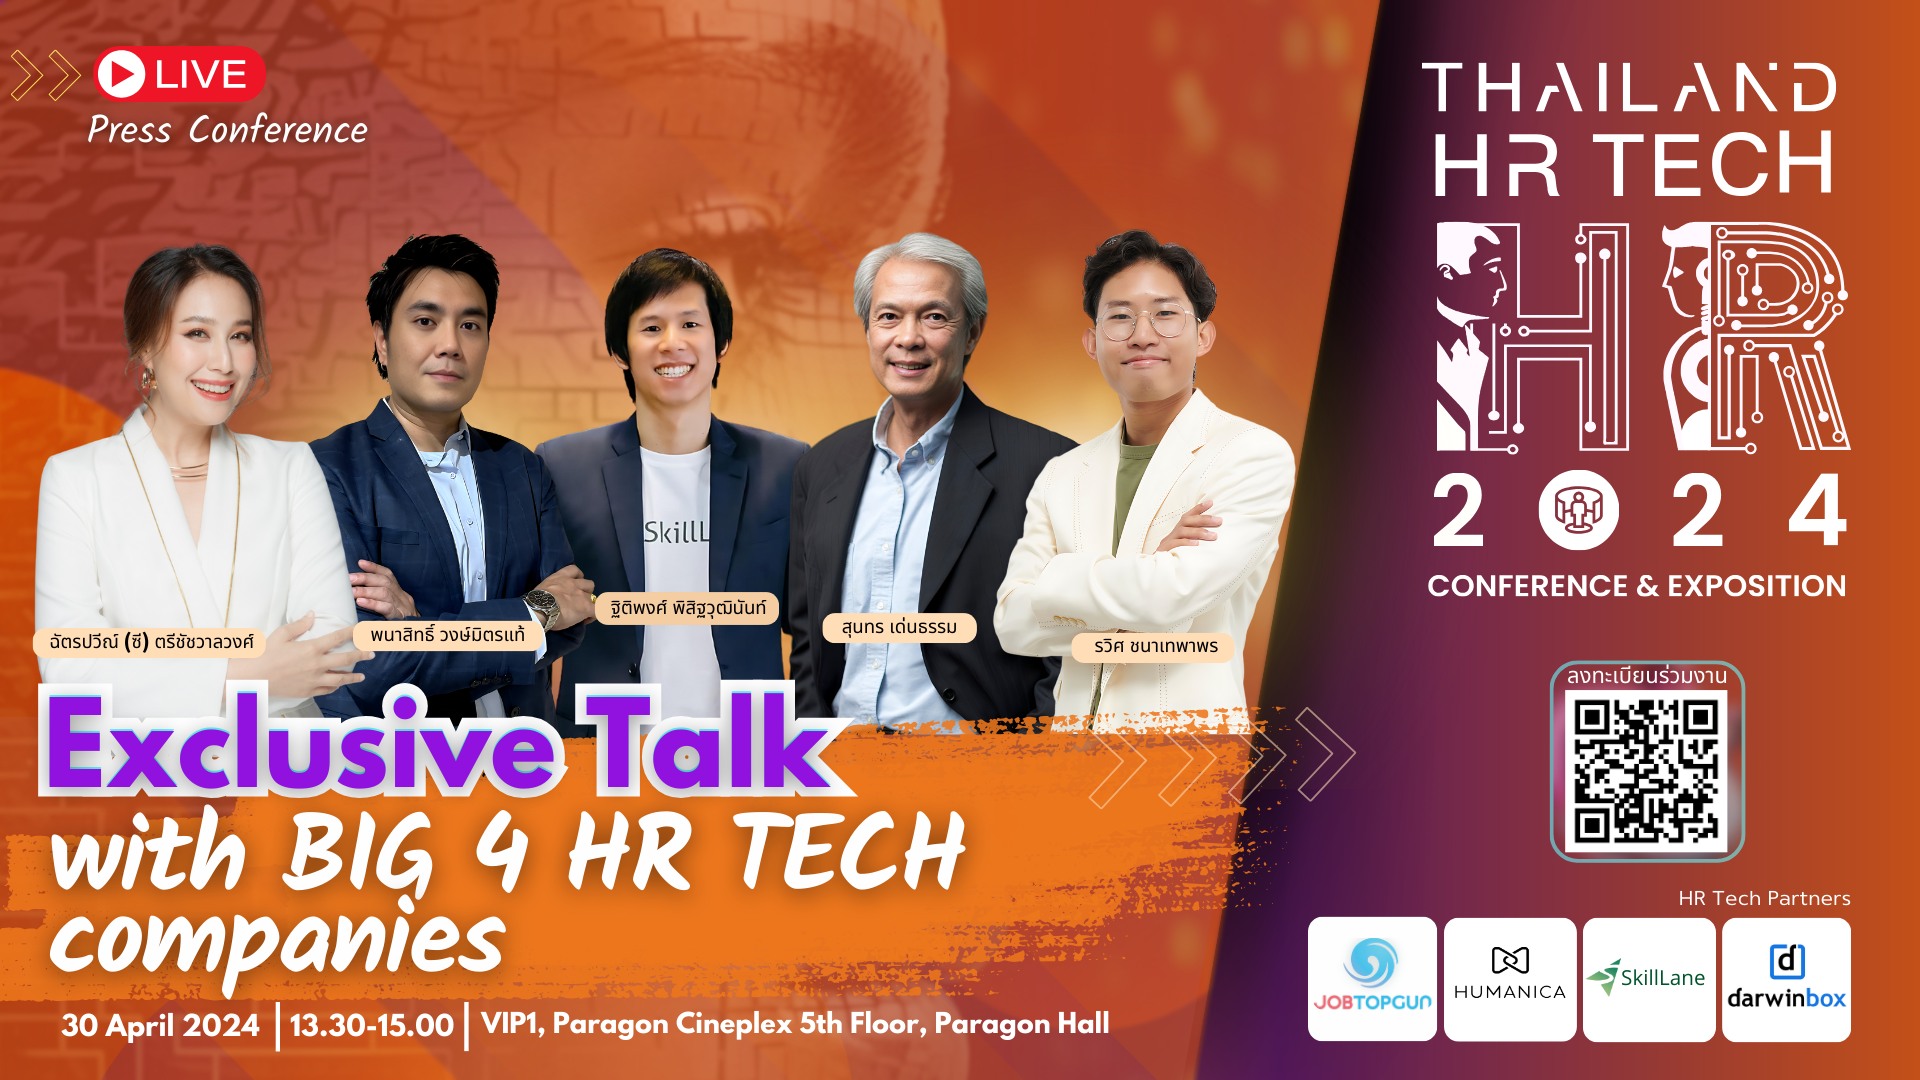 Press Conference Exclusive Talk with BIG 4 HR TECH companies